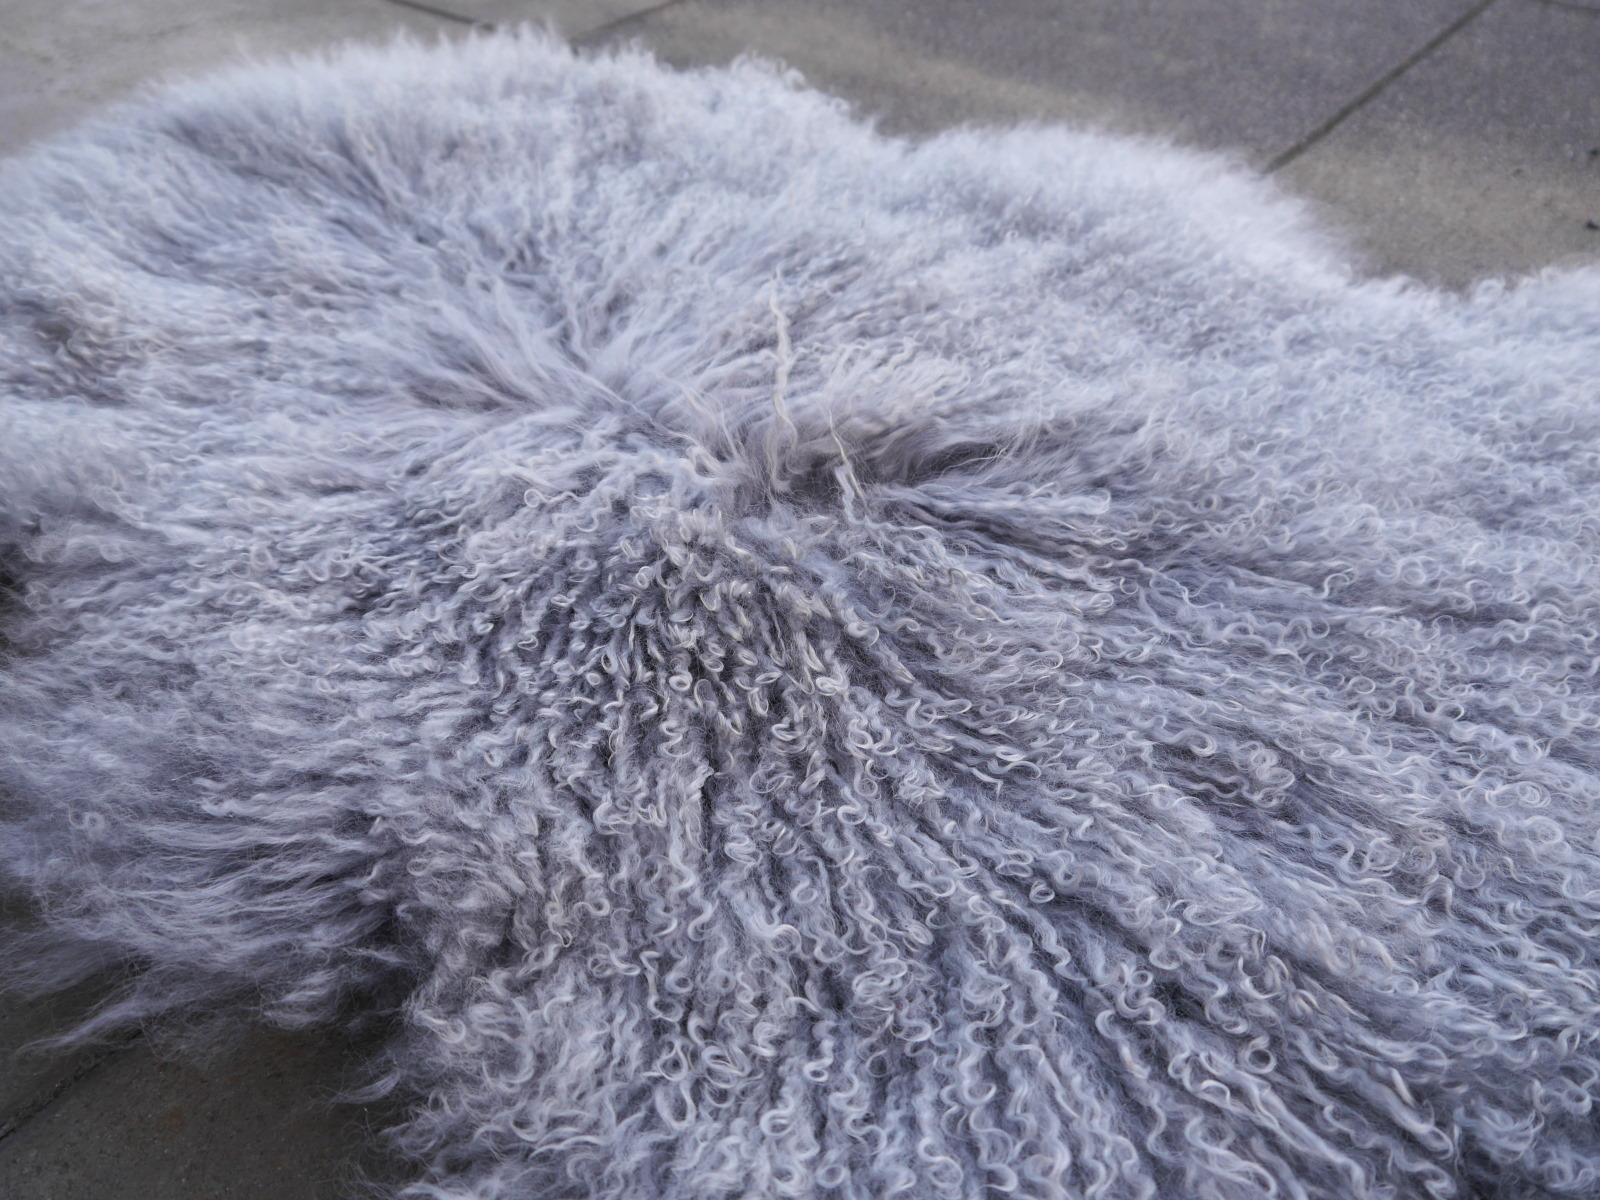 Sheep skin rug Tibetan Mongolian long hair curley hide

Our premium sheep skin rugs are of excellent quality, all hand selected. They go great with many decor styles such as South Western, Industrial, Midcentury, Hollywood Regency and contemporary